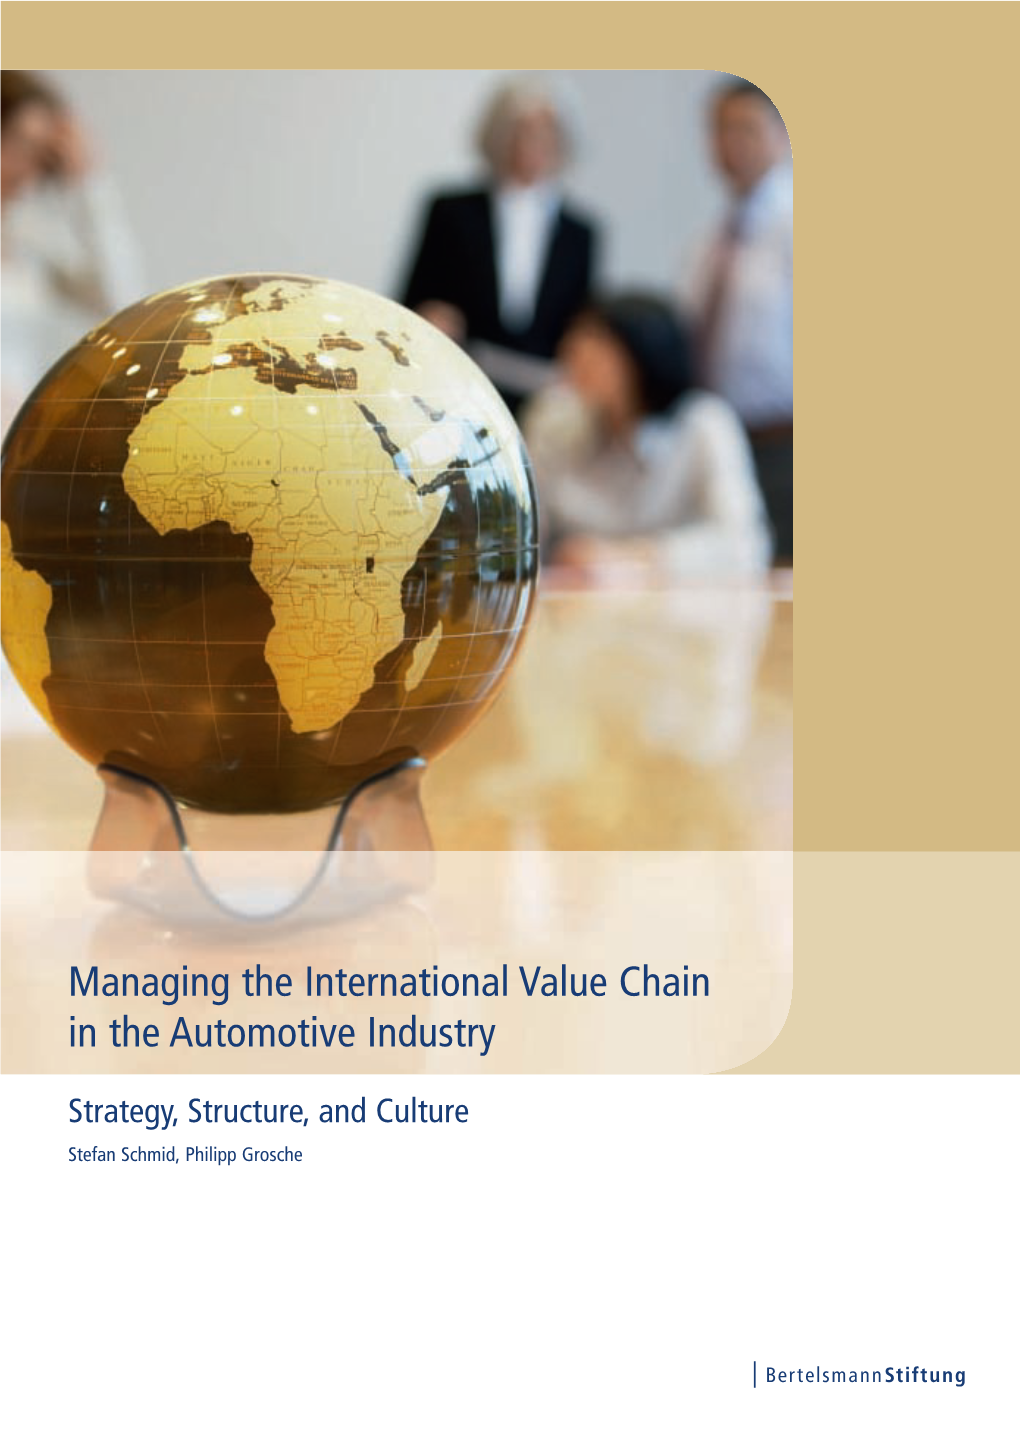 Managing the International Value Chain in the Automotive Industry